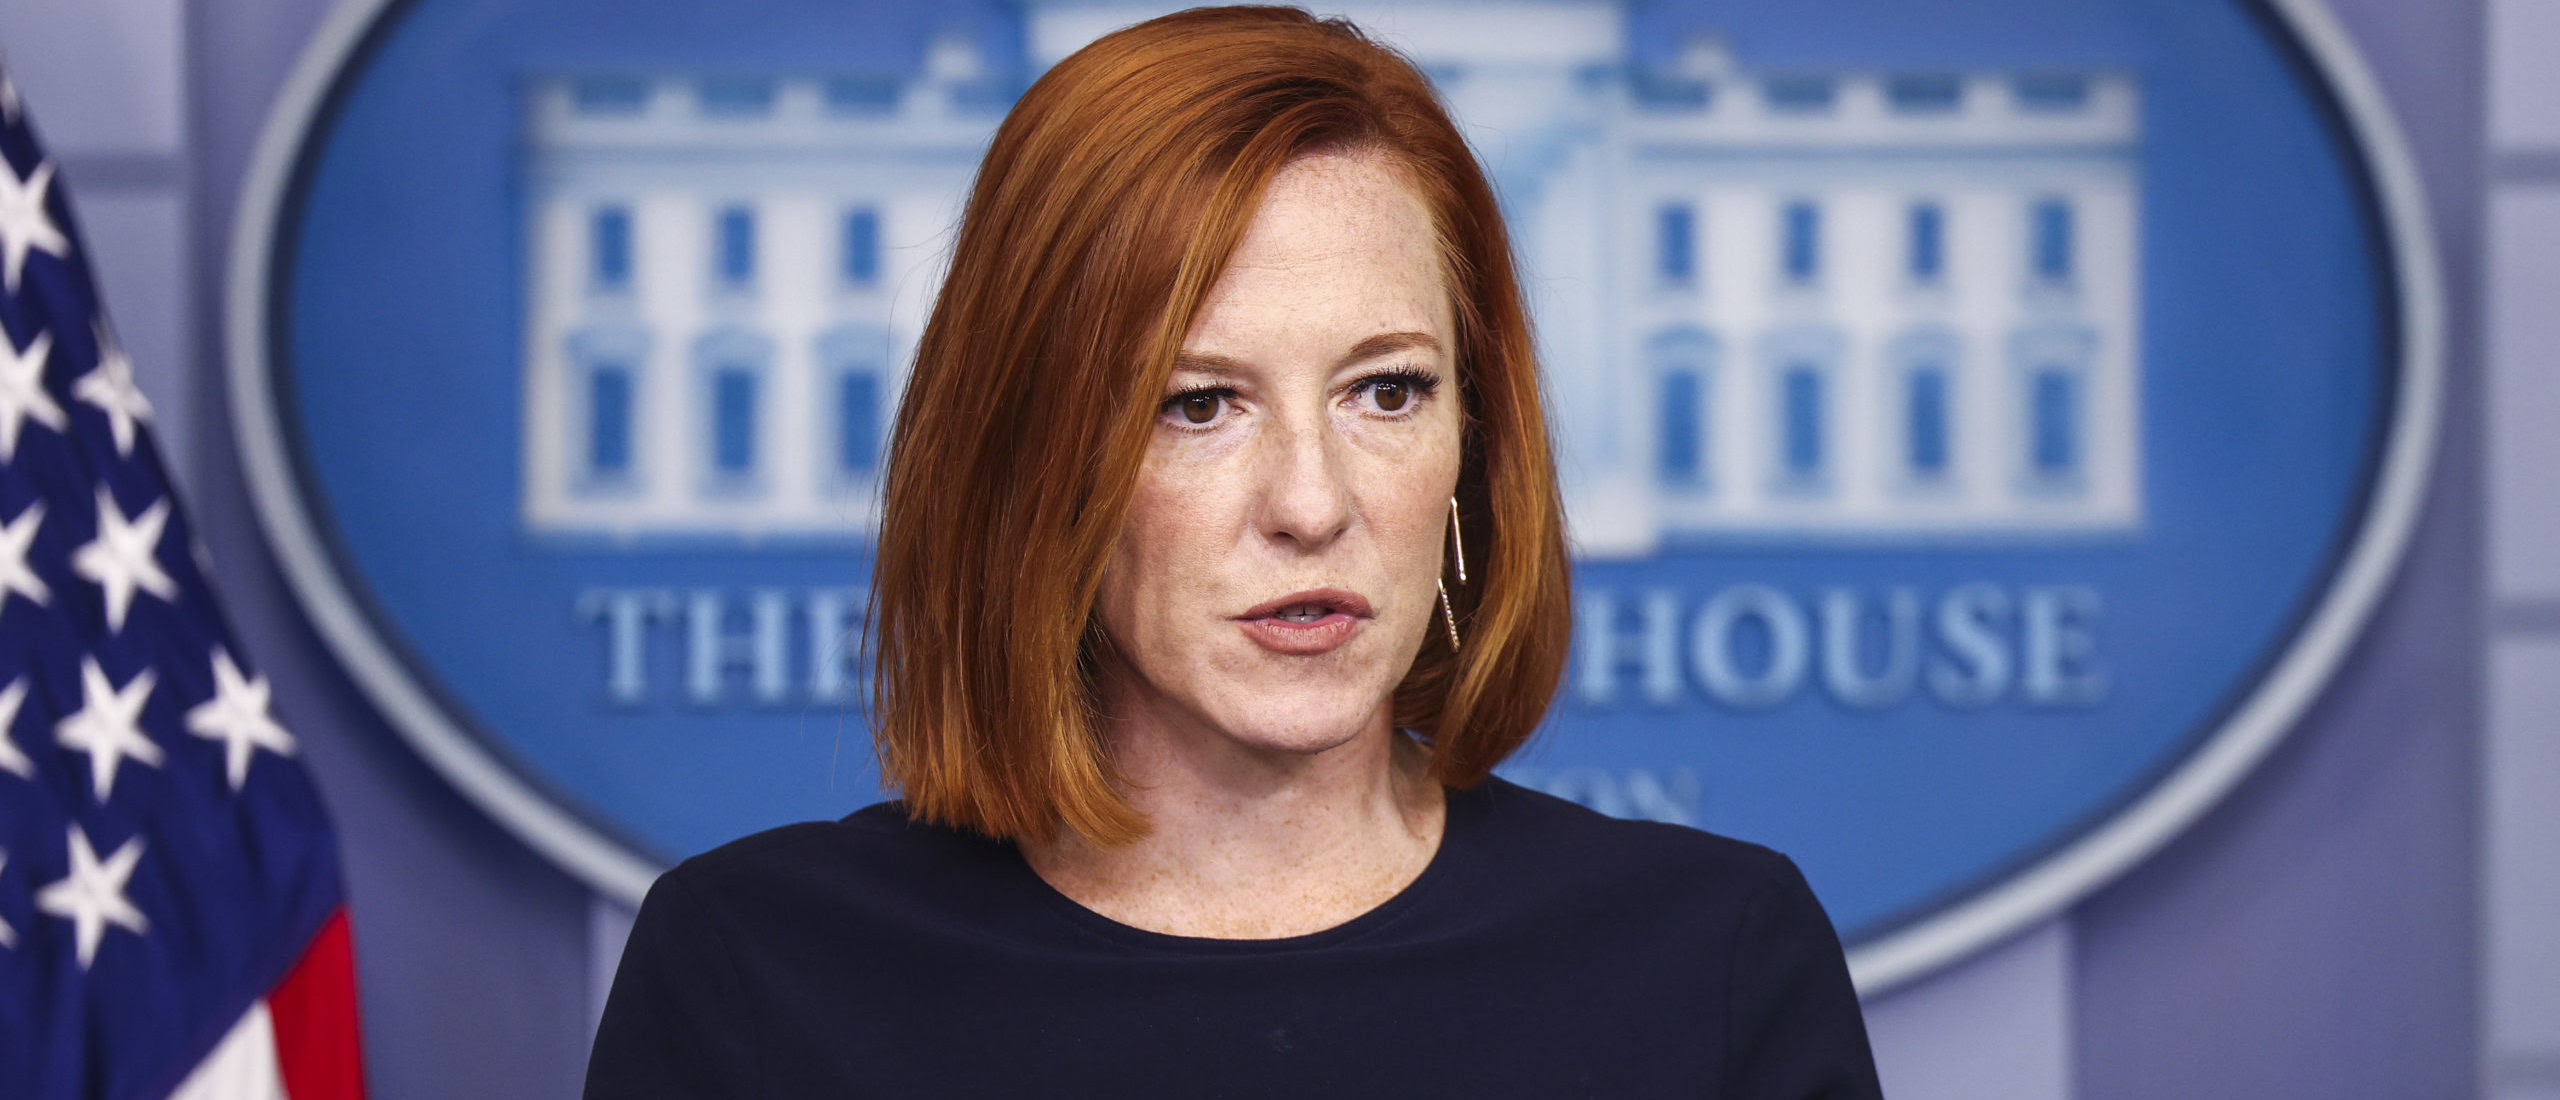 Psaki Responds To China’s New Nuclear-Capable, Advanced Missile Tech That Reportedly Rattled US Intelligence